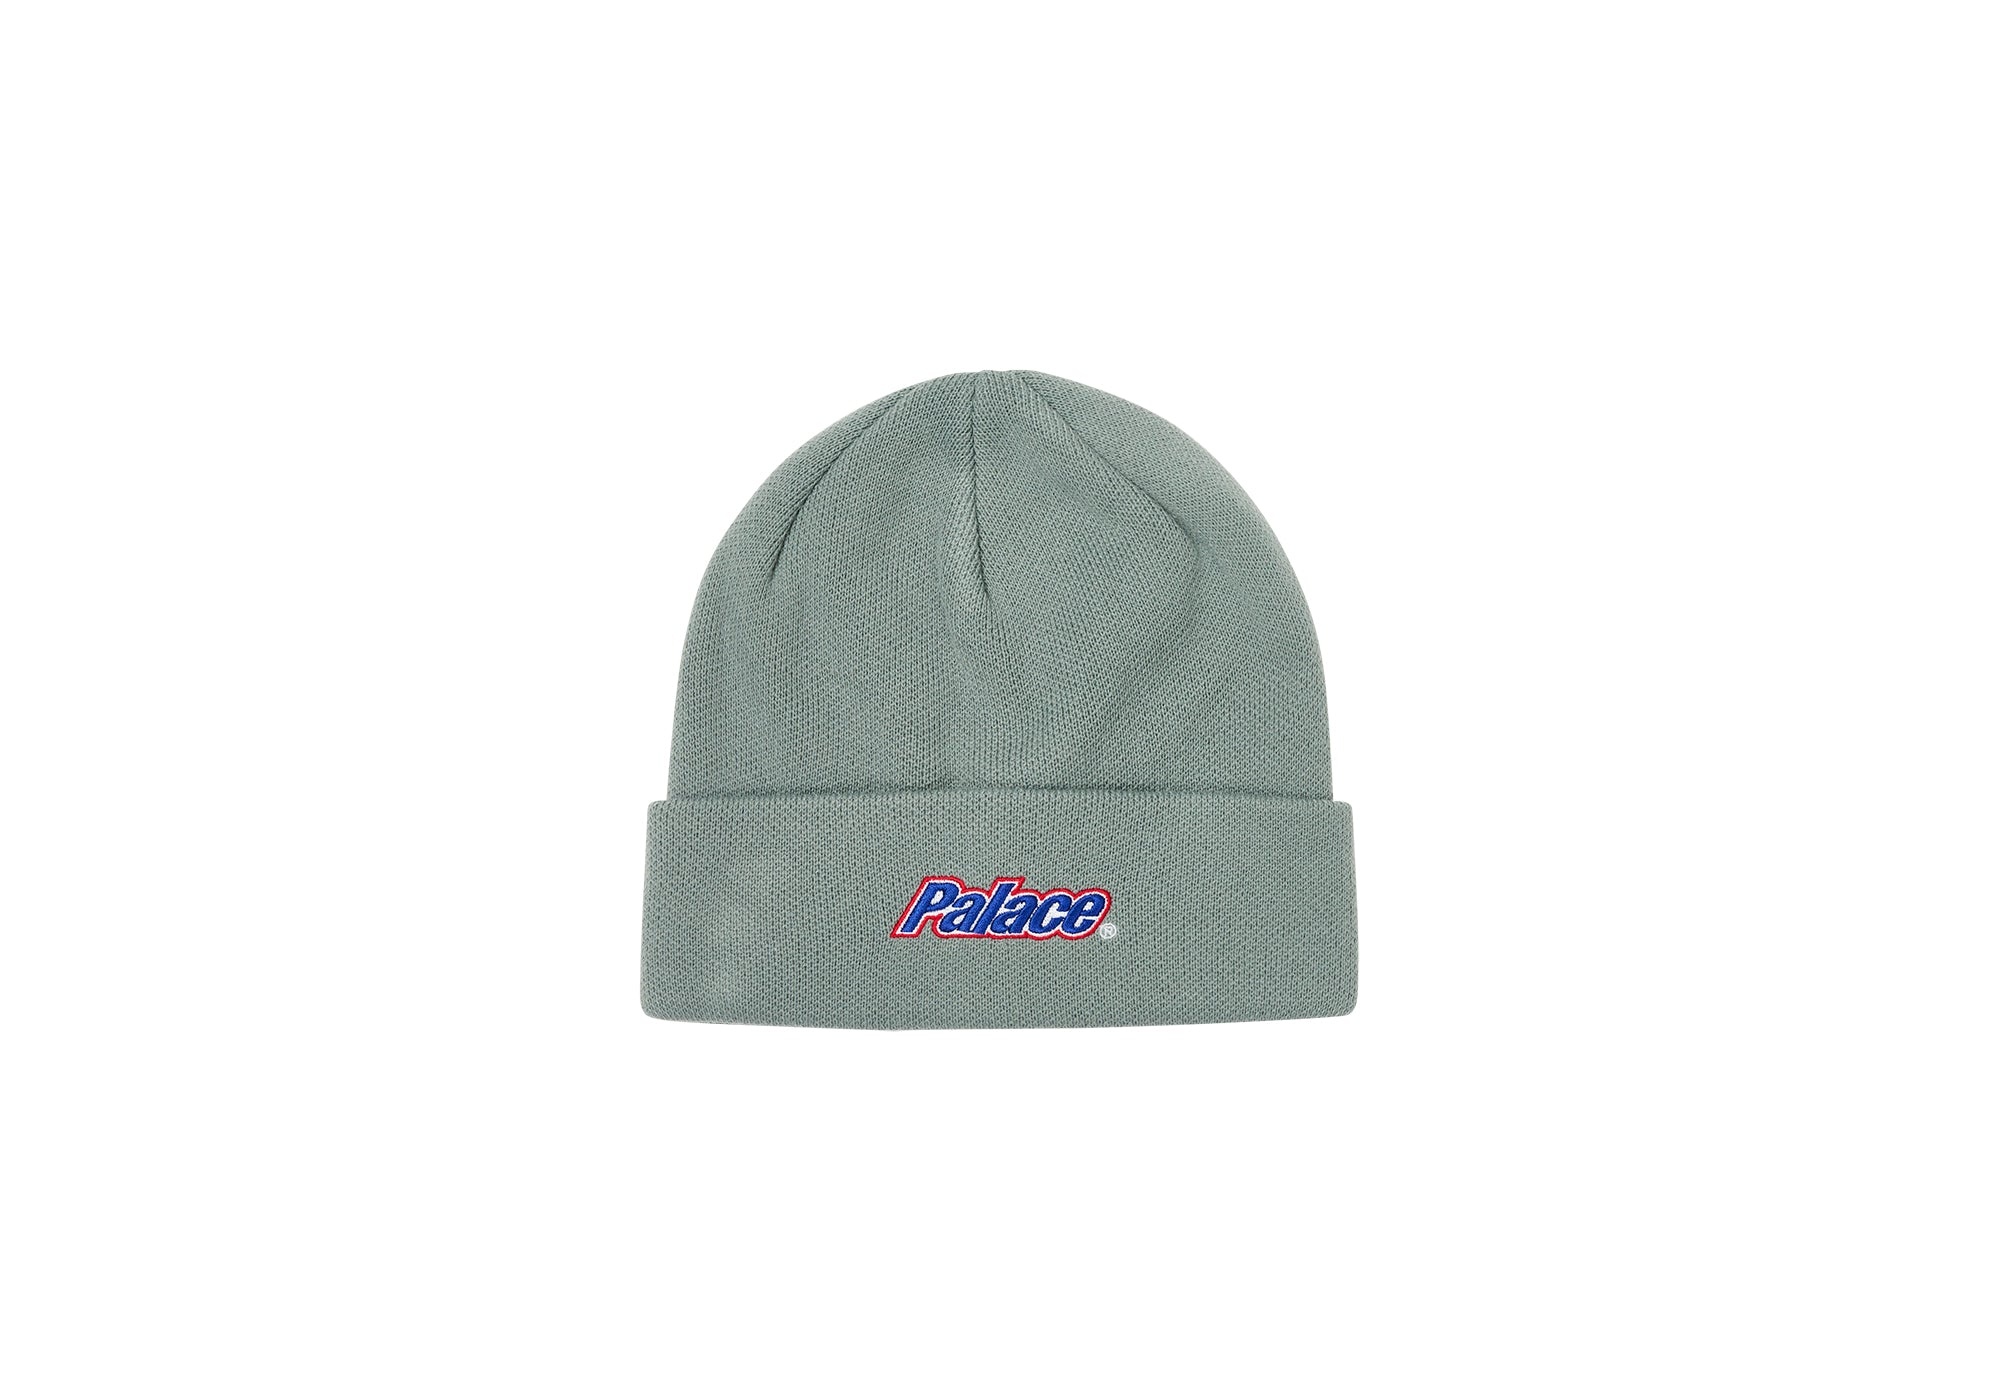 Palace Panther Beanie Grey Marl